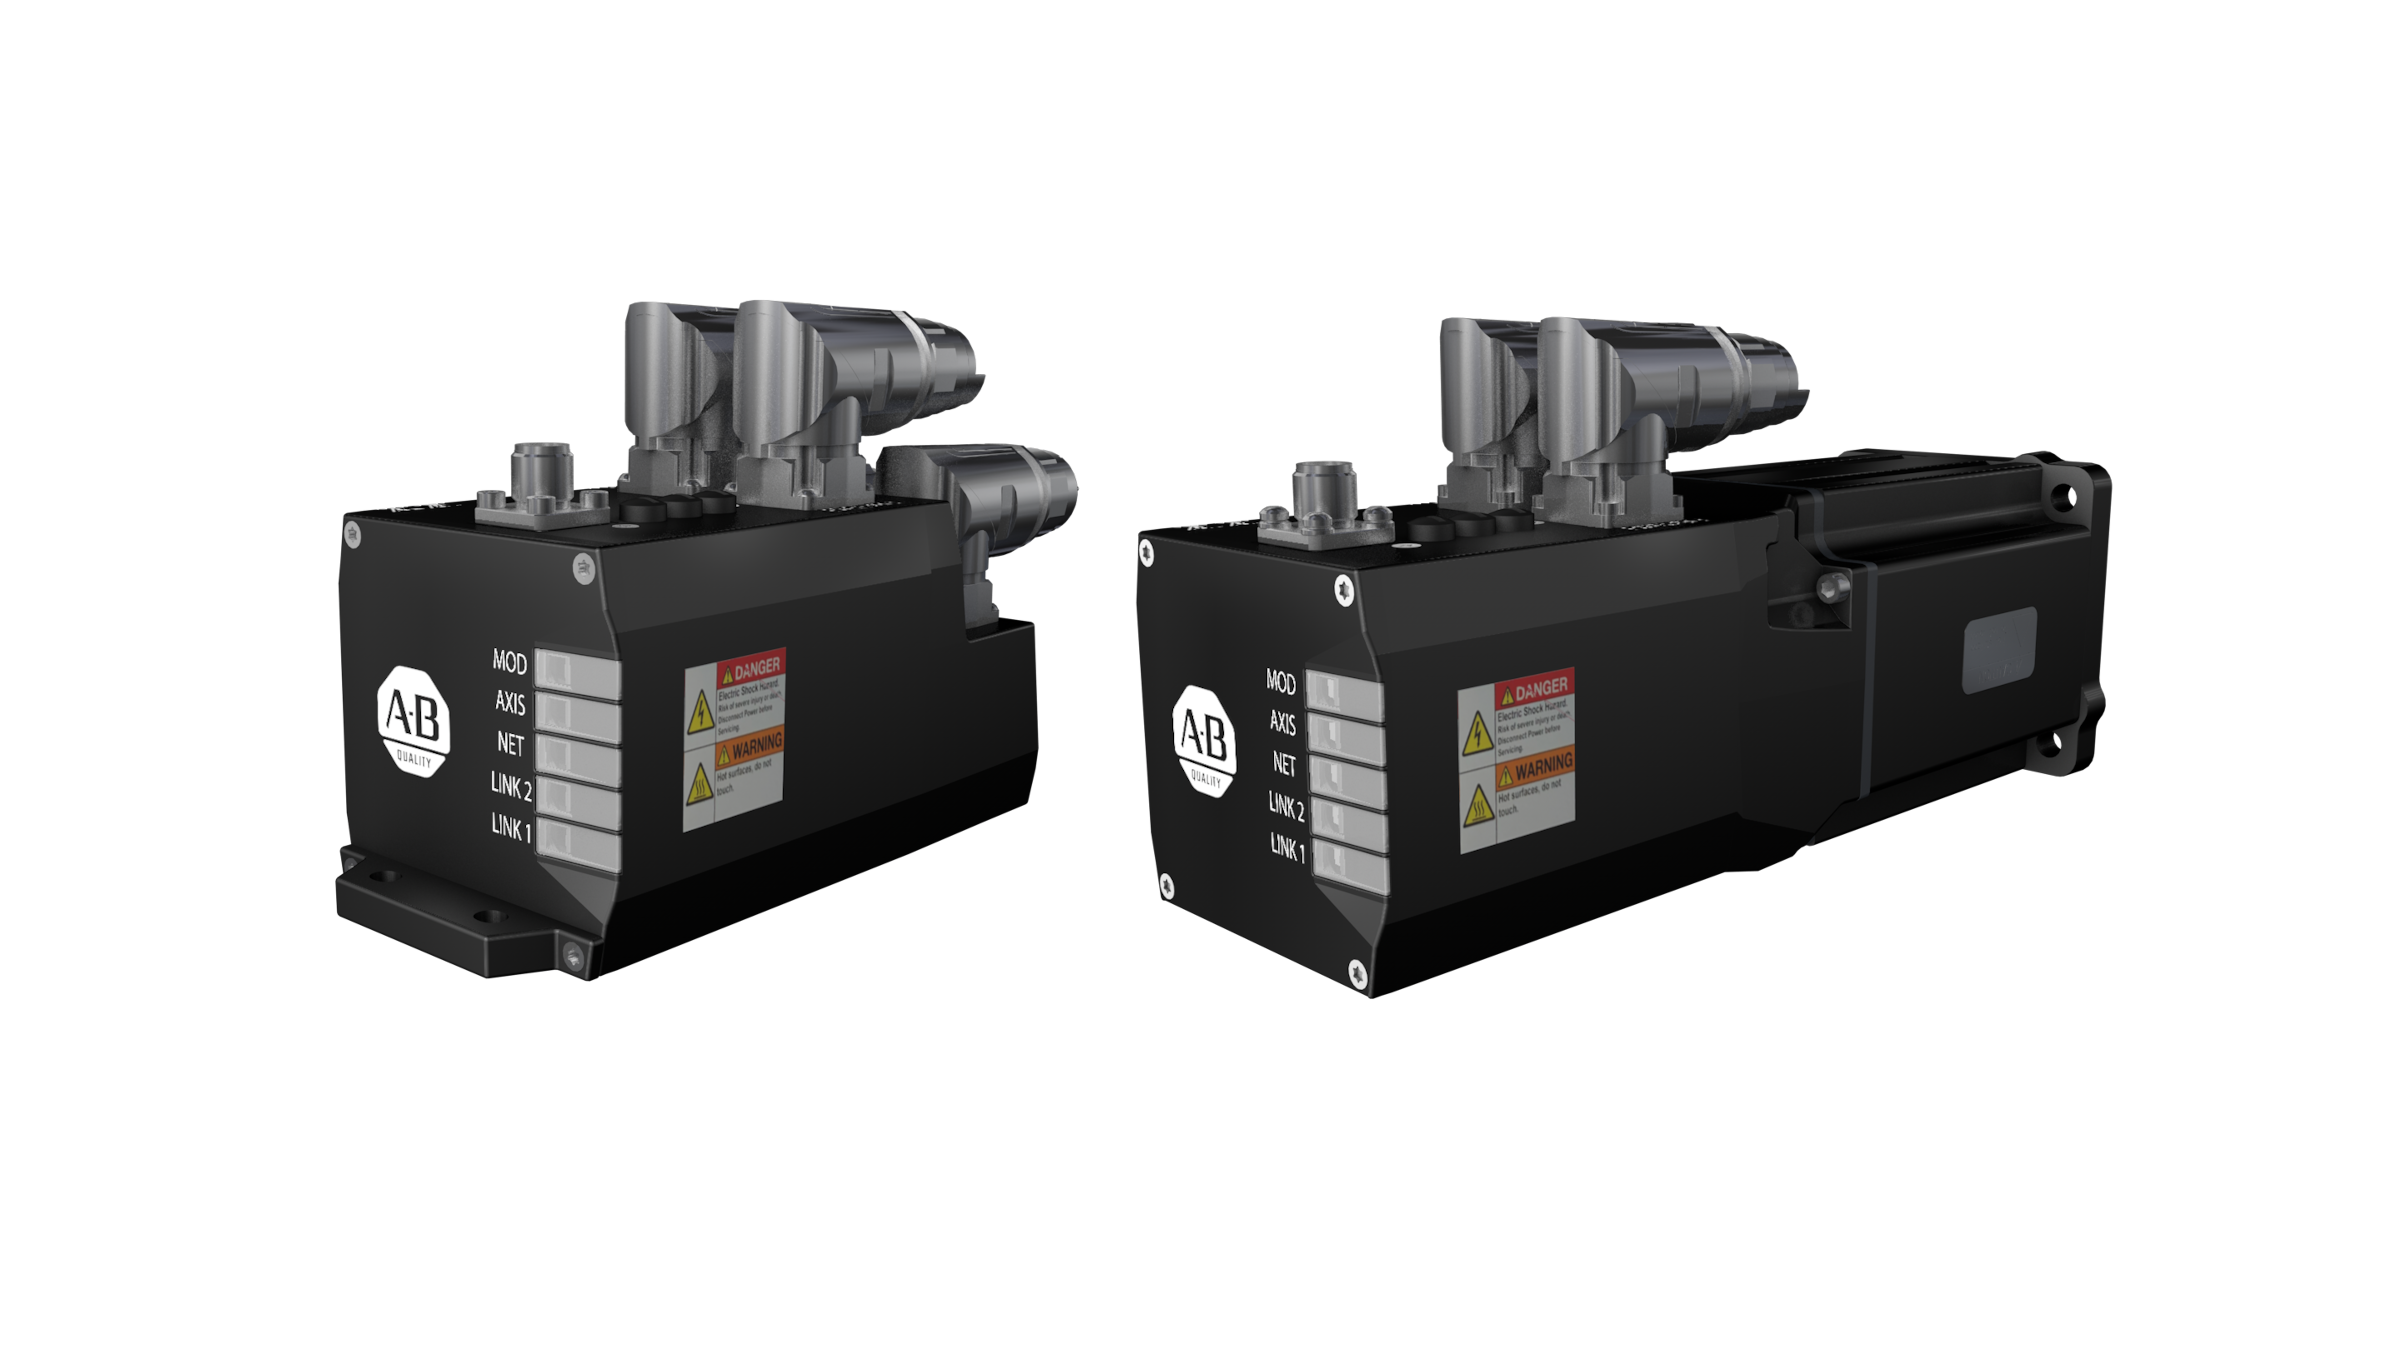 A 45 degree side view of an ArmorKinetix Distributed Servo Drive and an ArmorKinetix Distributed Servo and Motor next to each other on a white background.